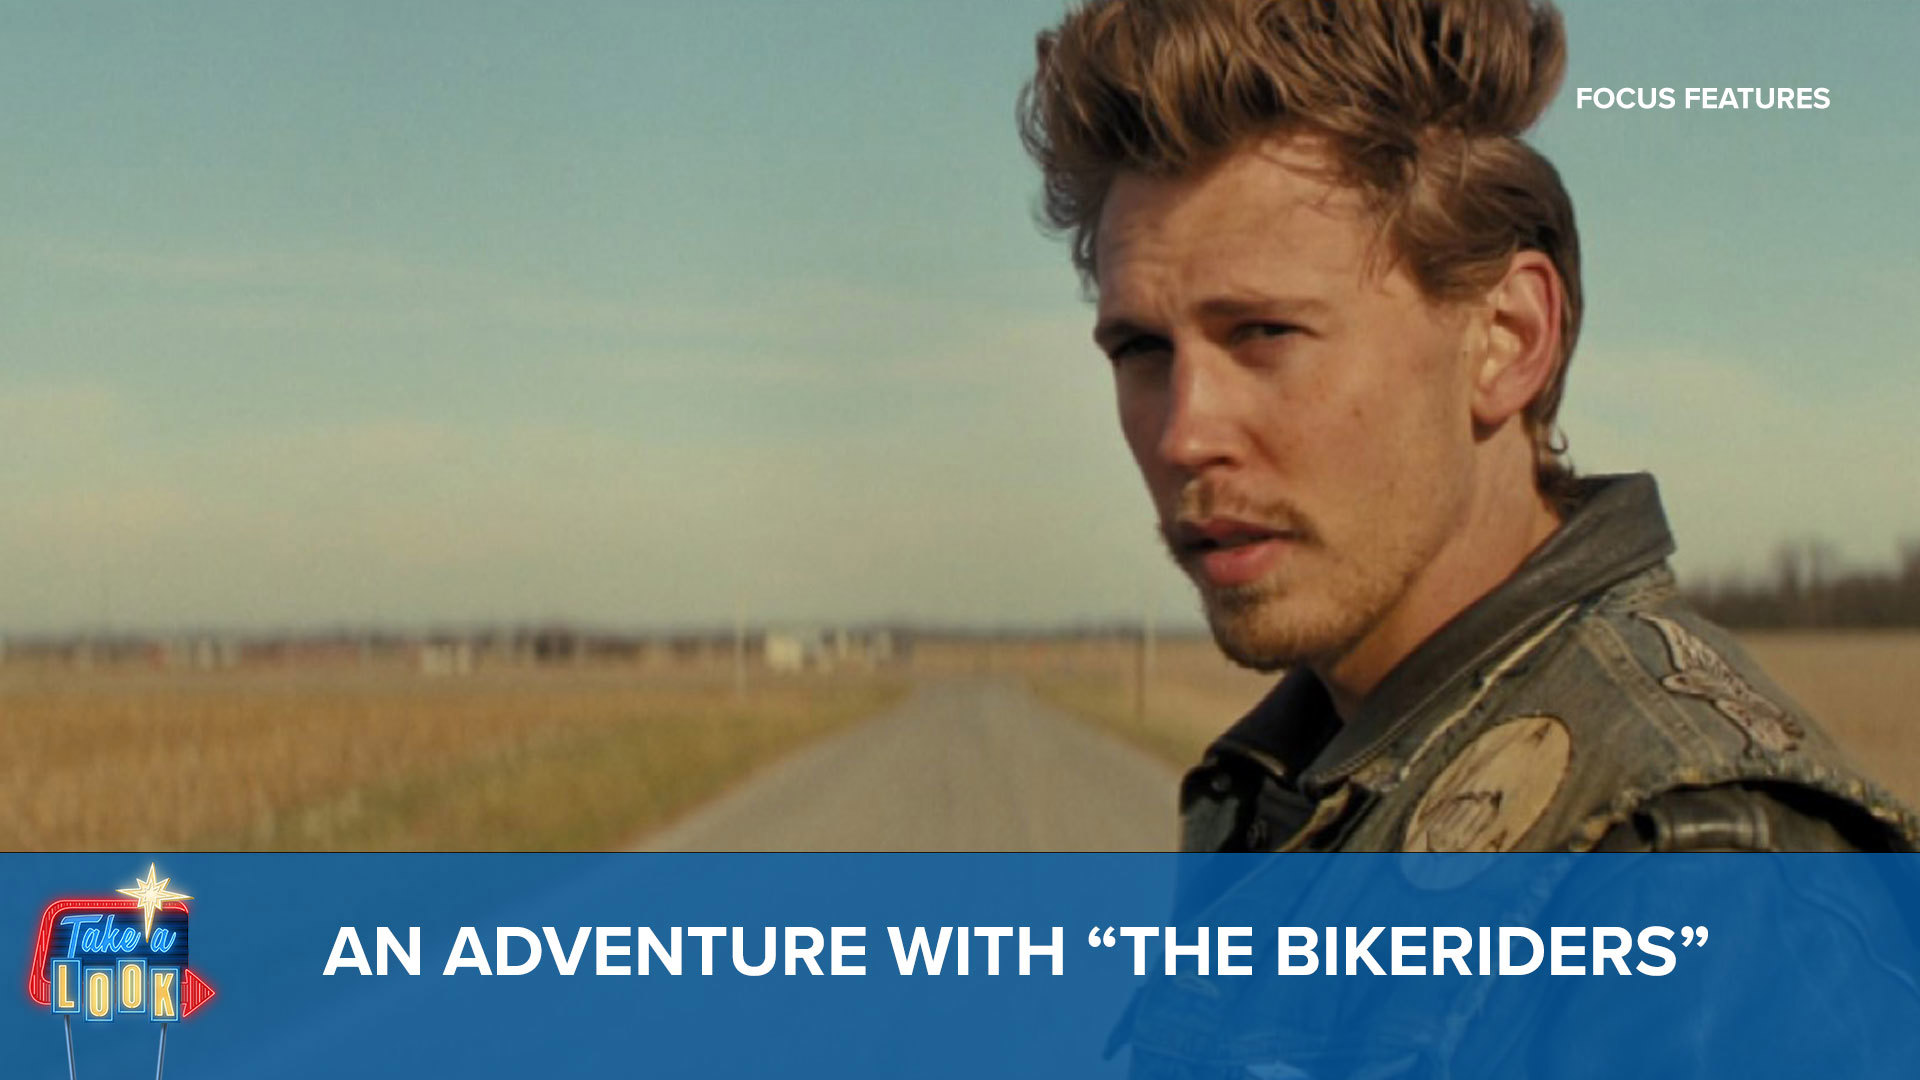 This week on “Take a Look” with Mark S. Allen:  We go on an adventure with “The Bikeriders.”